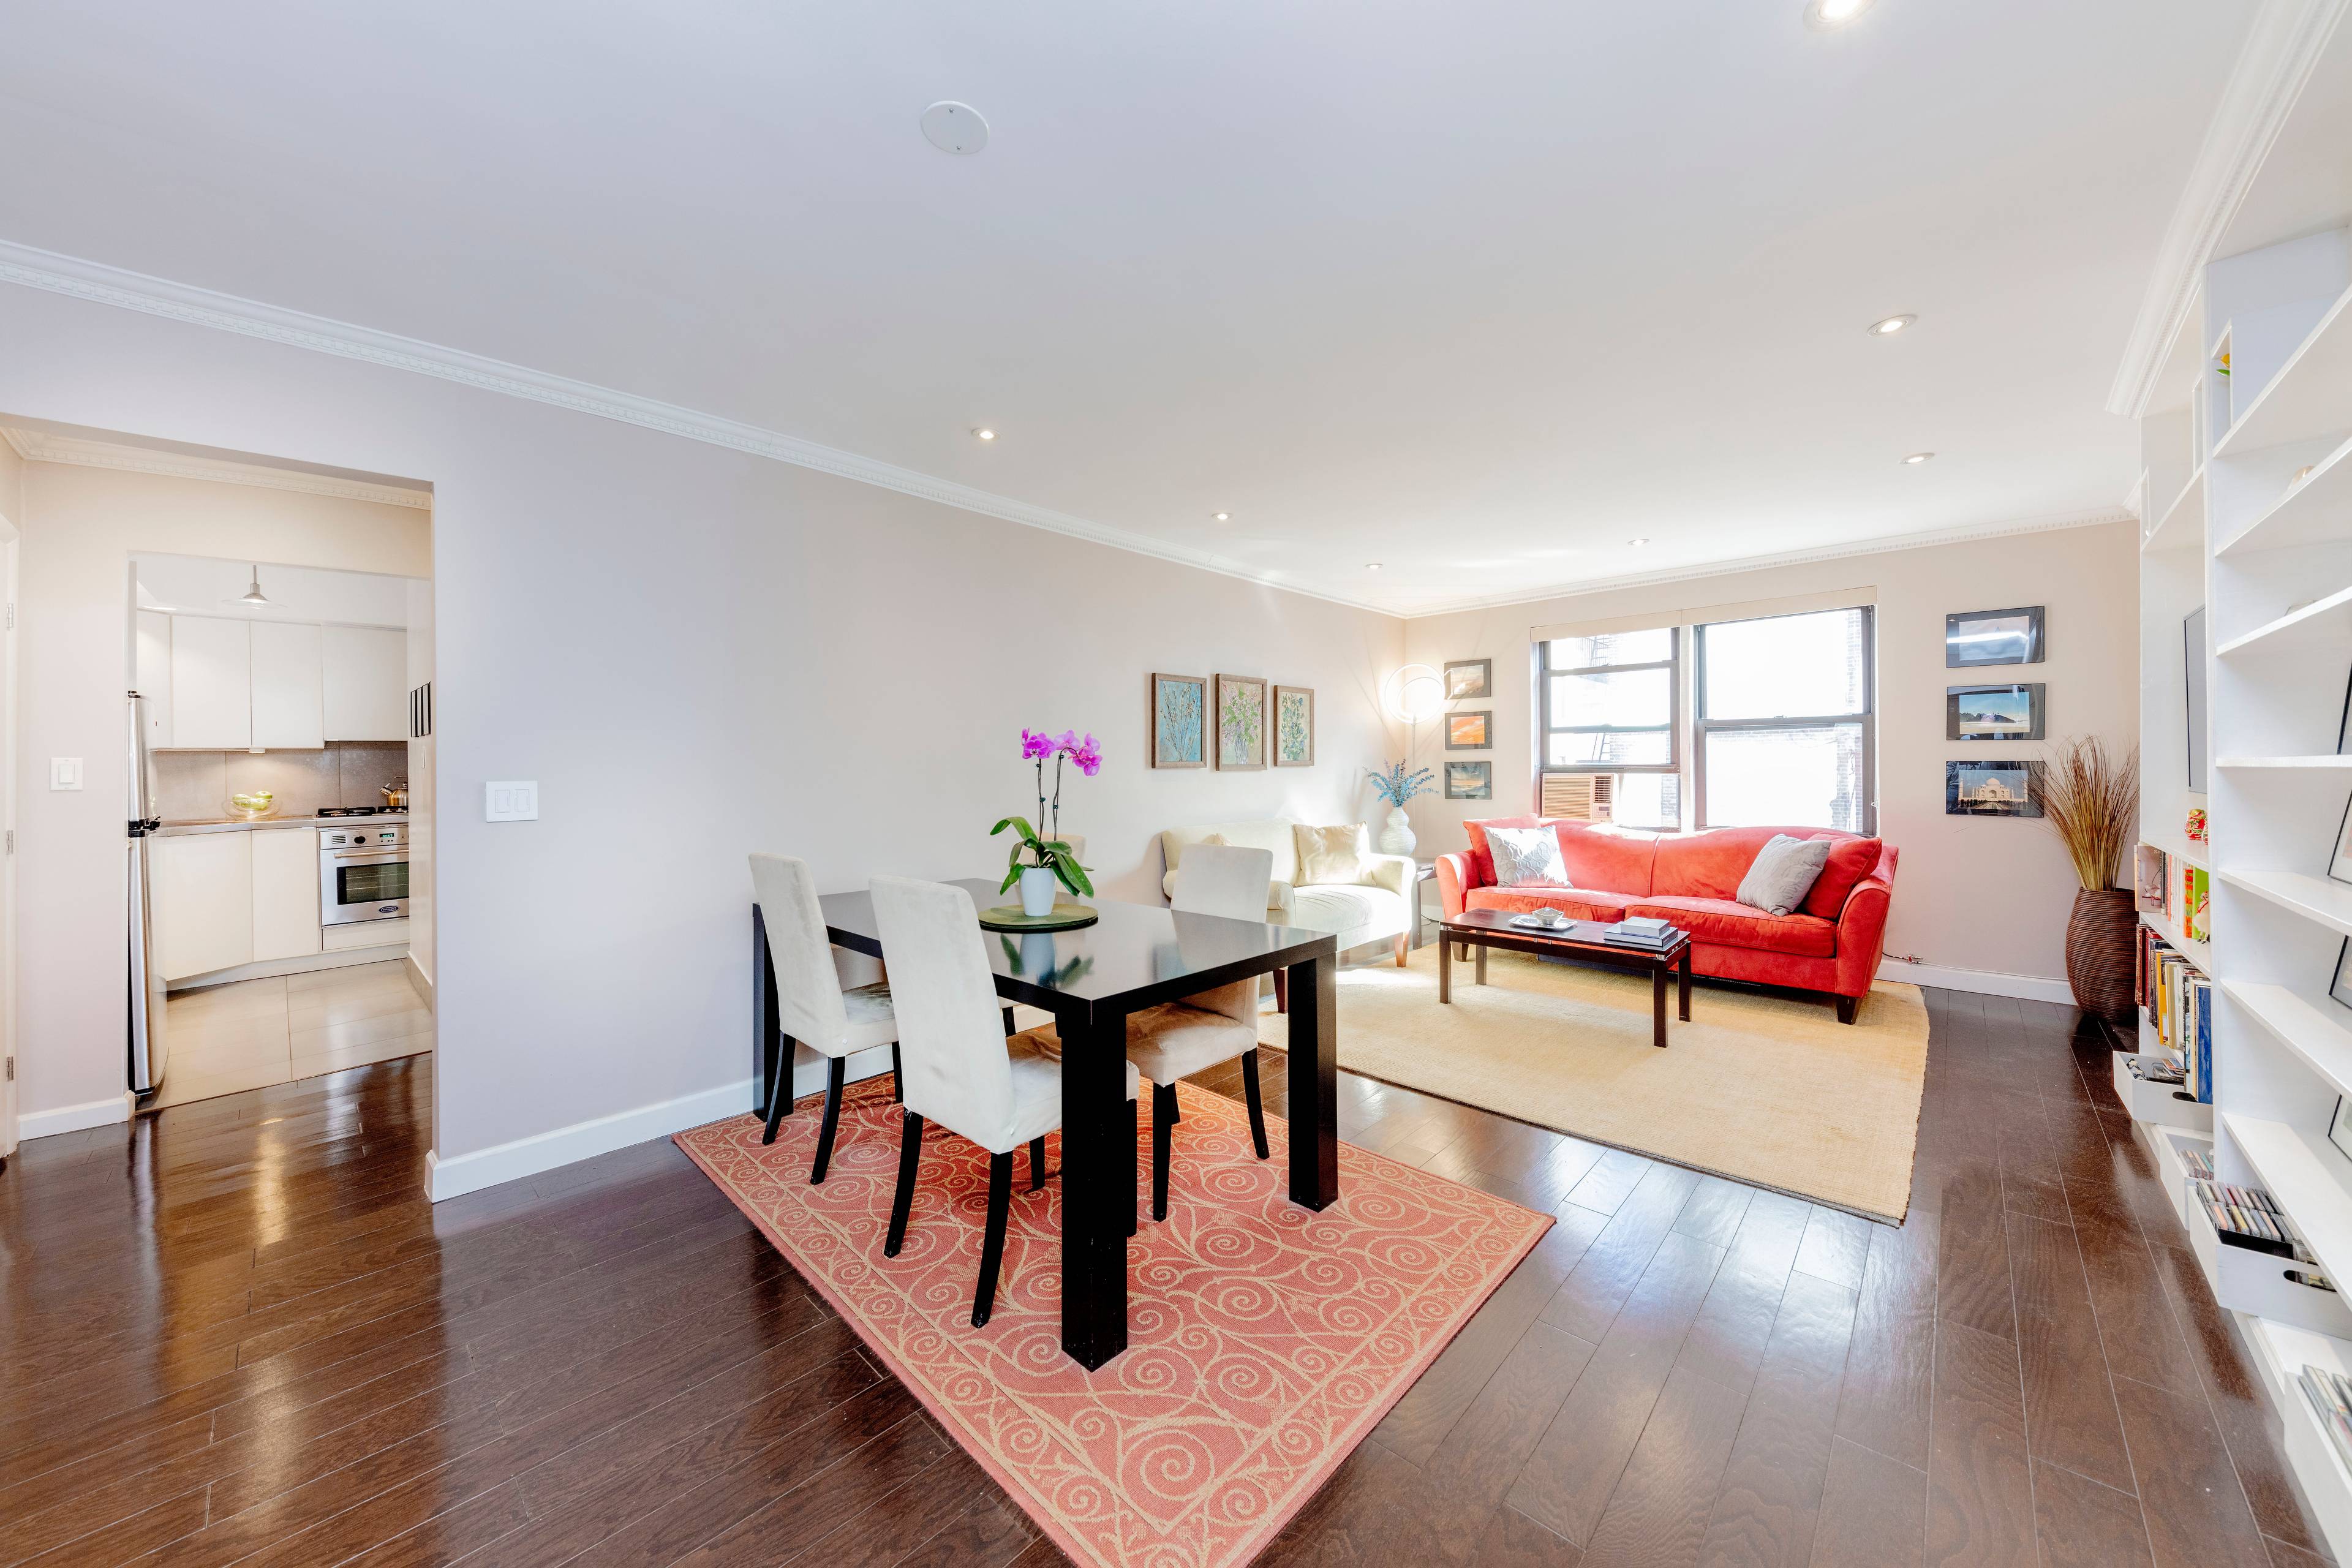 Welcome home to this beautifully renovated 1 bedroom on Irving Place, one of the most desired blocks in Manhattan.